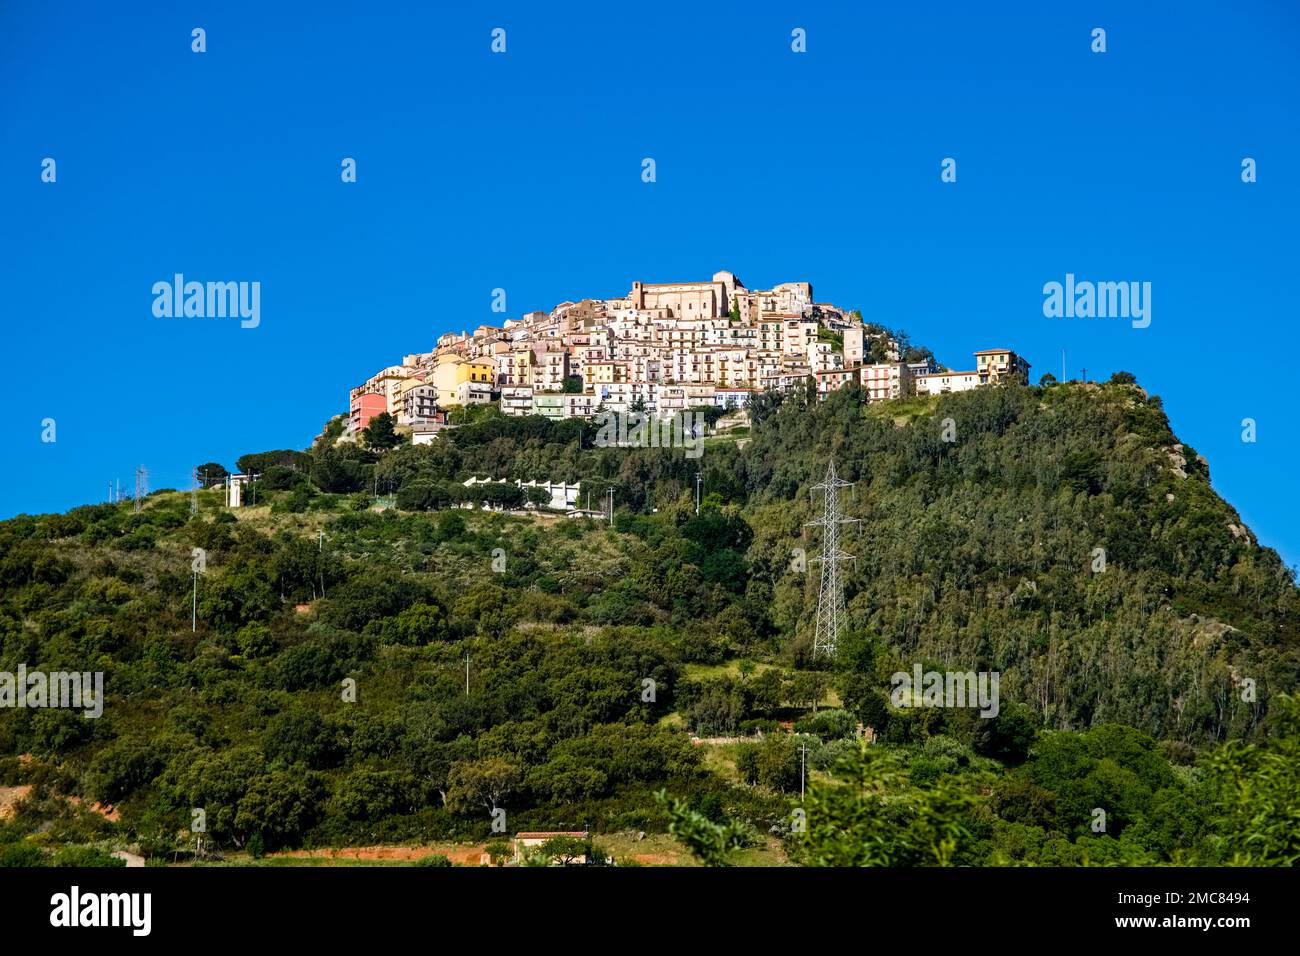 View on the houses of the small town of Pollina, located on a hill. Stock Photo